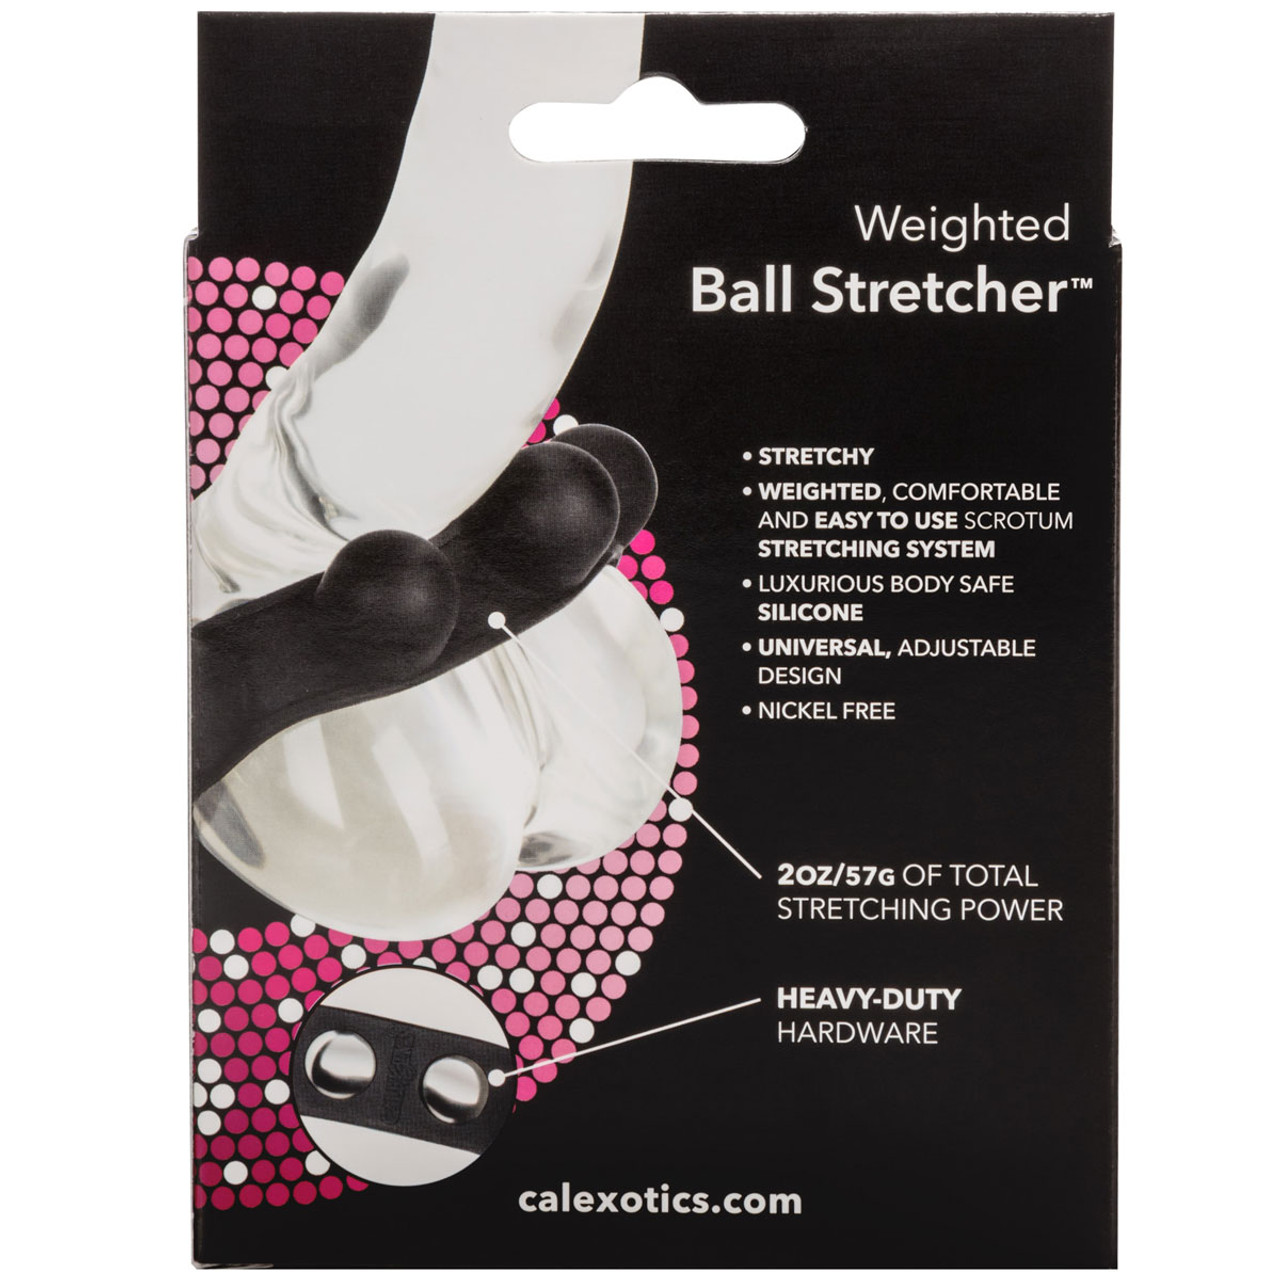 Silicone Weighted Ball Stretcher by CalExotics